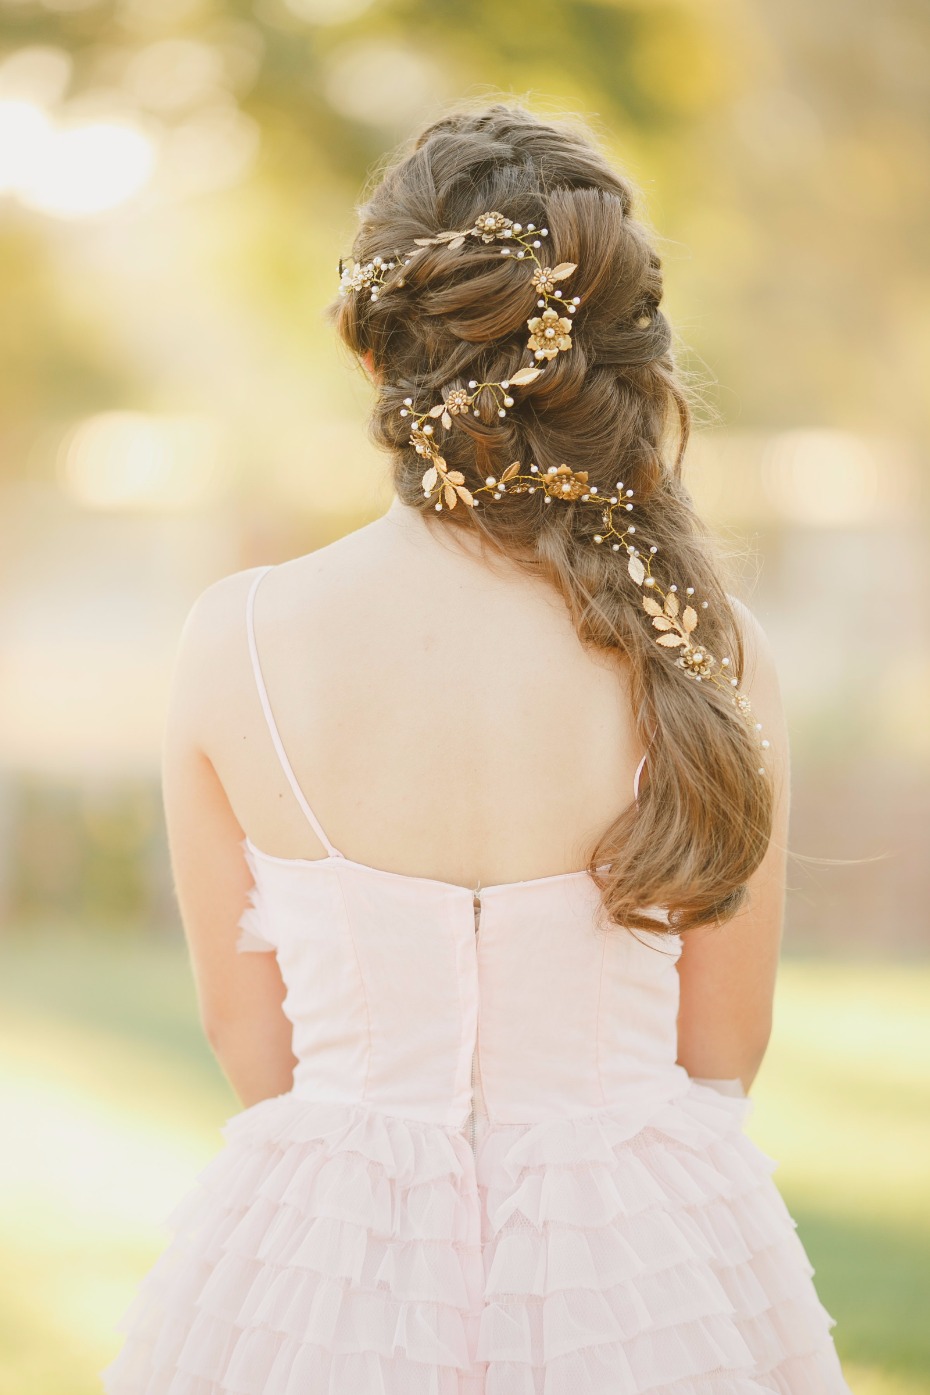 Gold vine hair accessory from Be Something New